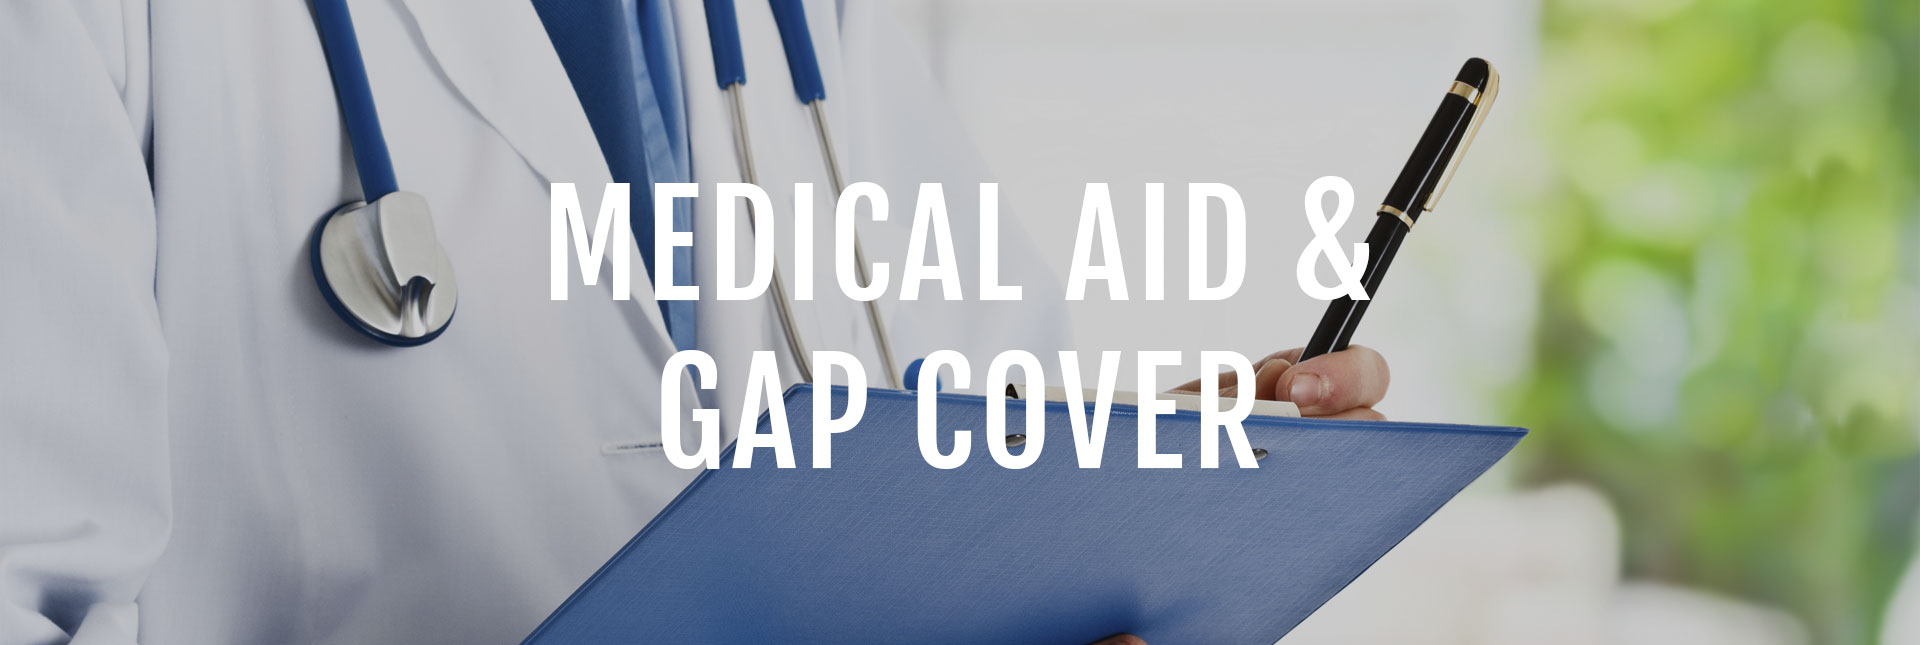 medical scheme, gap cover, medical aid, health care broker, medical aid quote, critical illness benefit, disability benefit